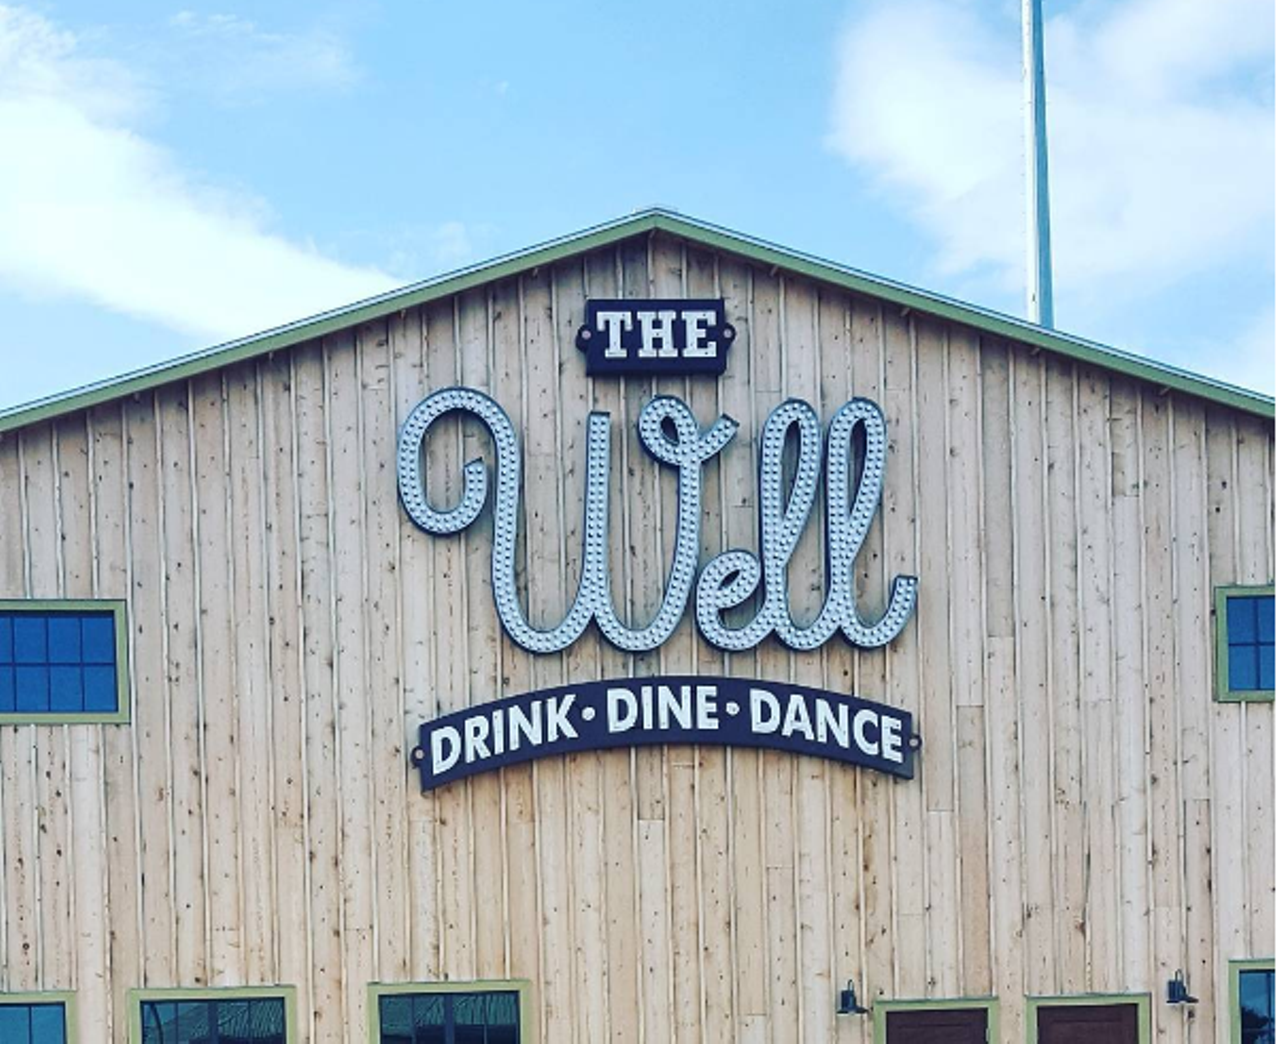 The Well
5539 UTSA Blvd., (210) 877-9099,  thewellsanantonio.com
You&#146;ll likely run into several classmates at this UTSA hang that combines dance hall with dog park, restaurant with cocktail bar. 
Photo via Instagram,  muhkayluh_